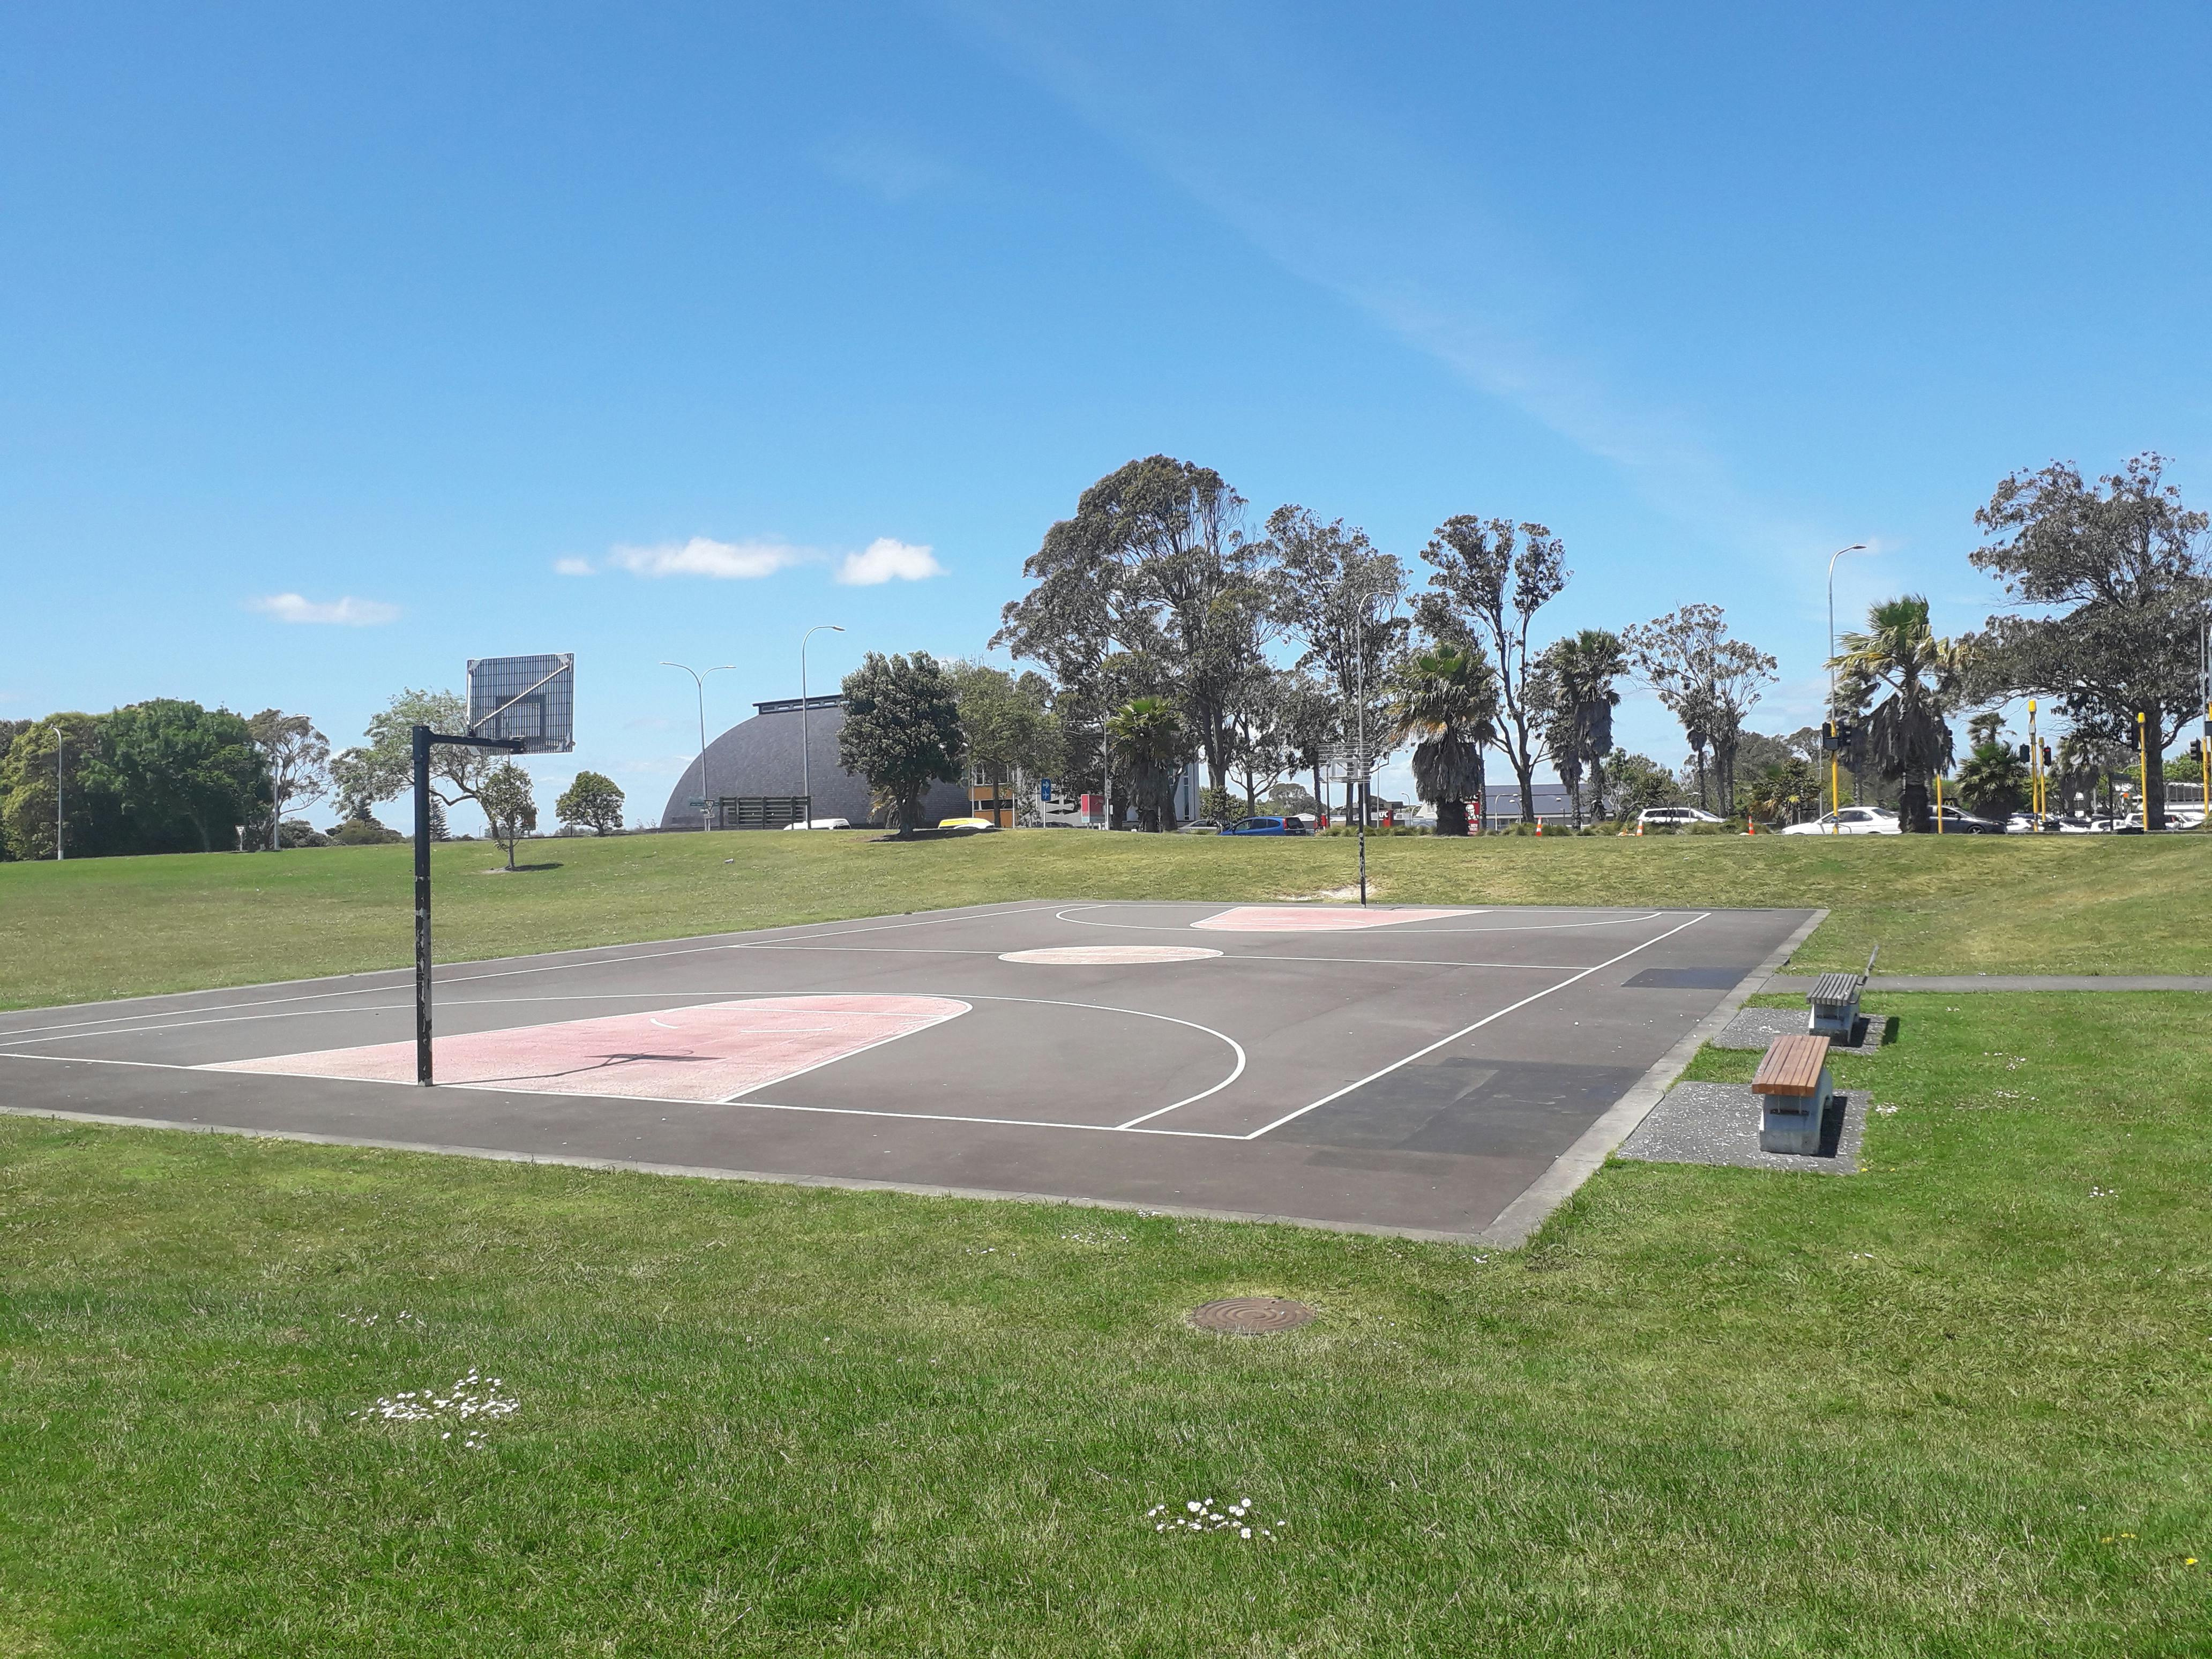 Existing Photograph - Basketball Court